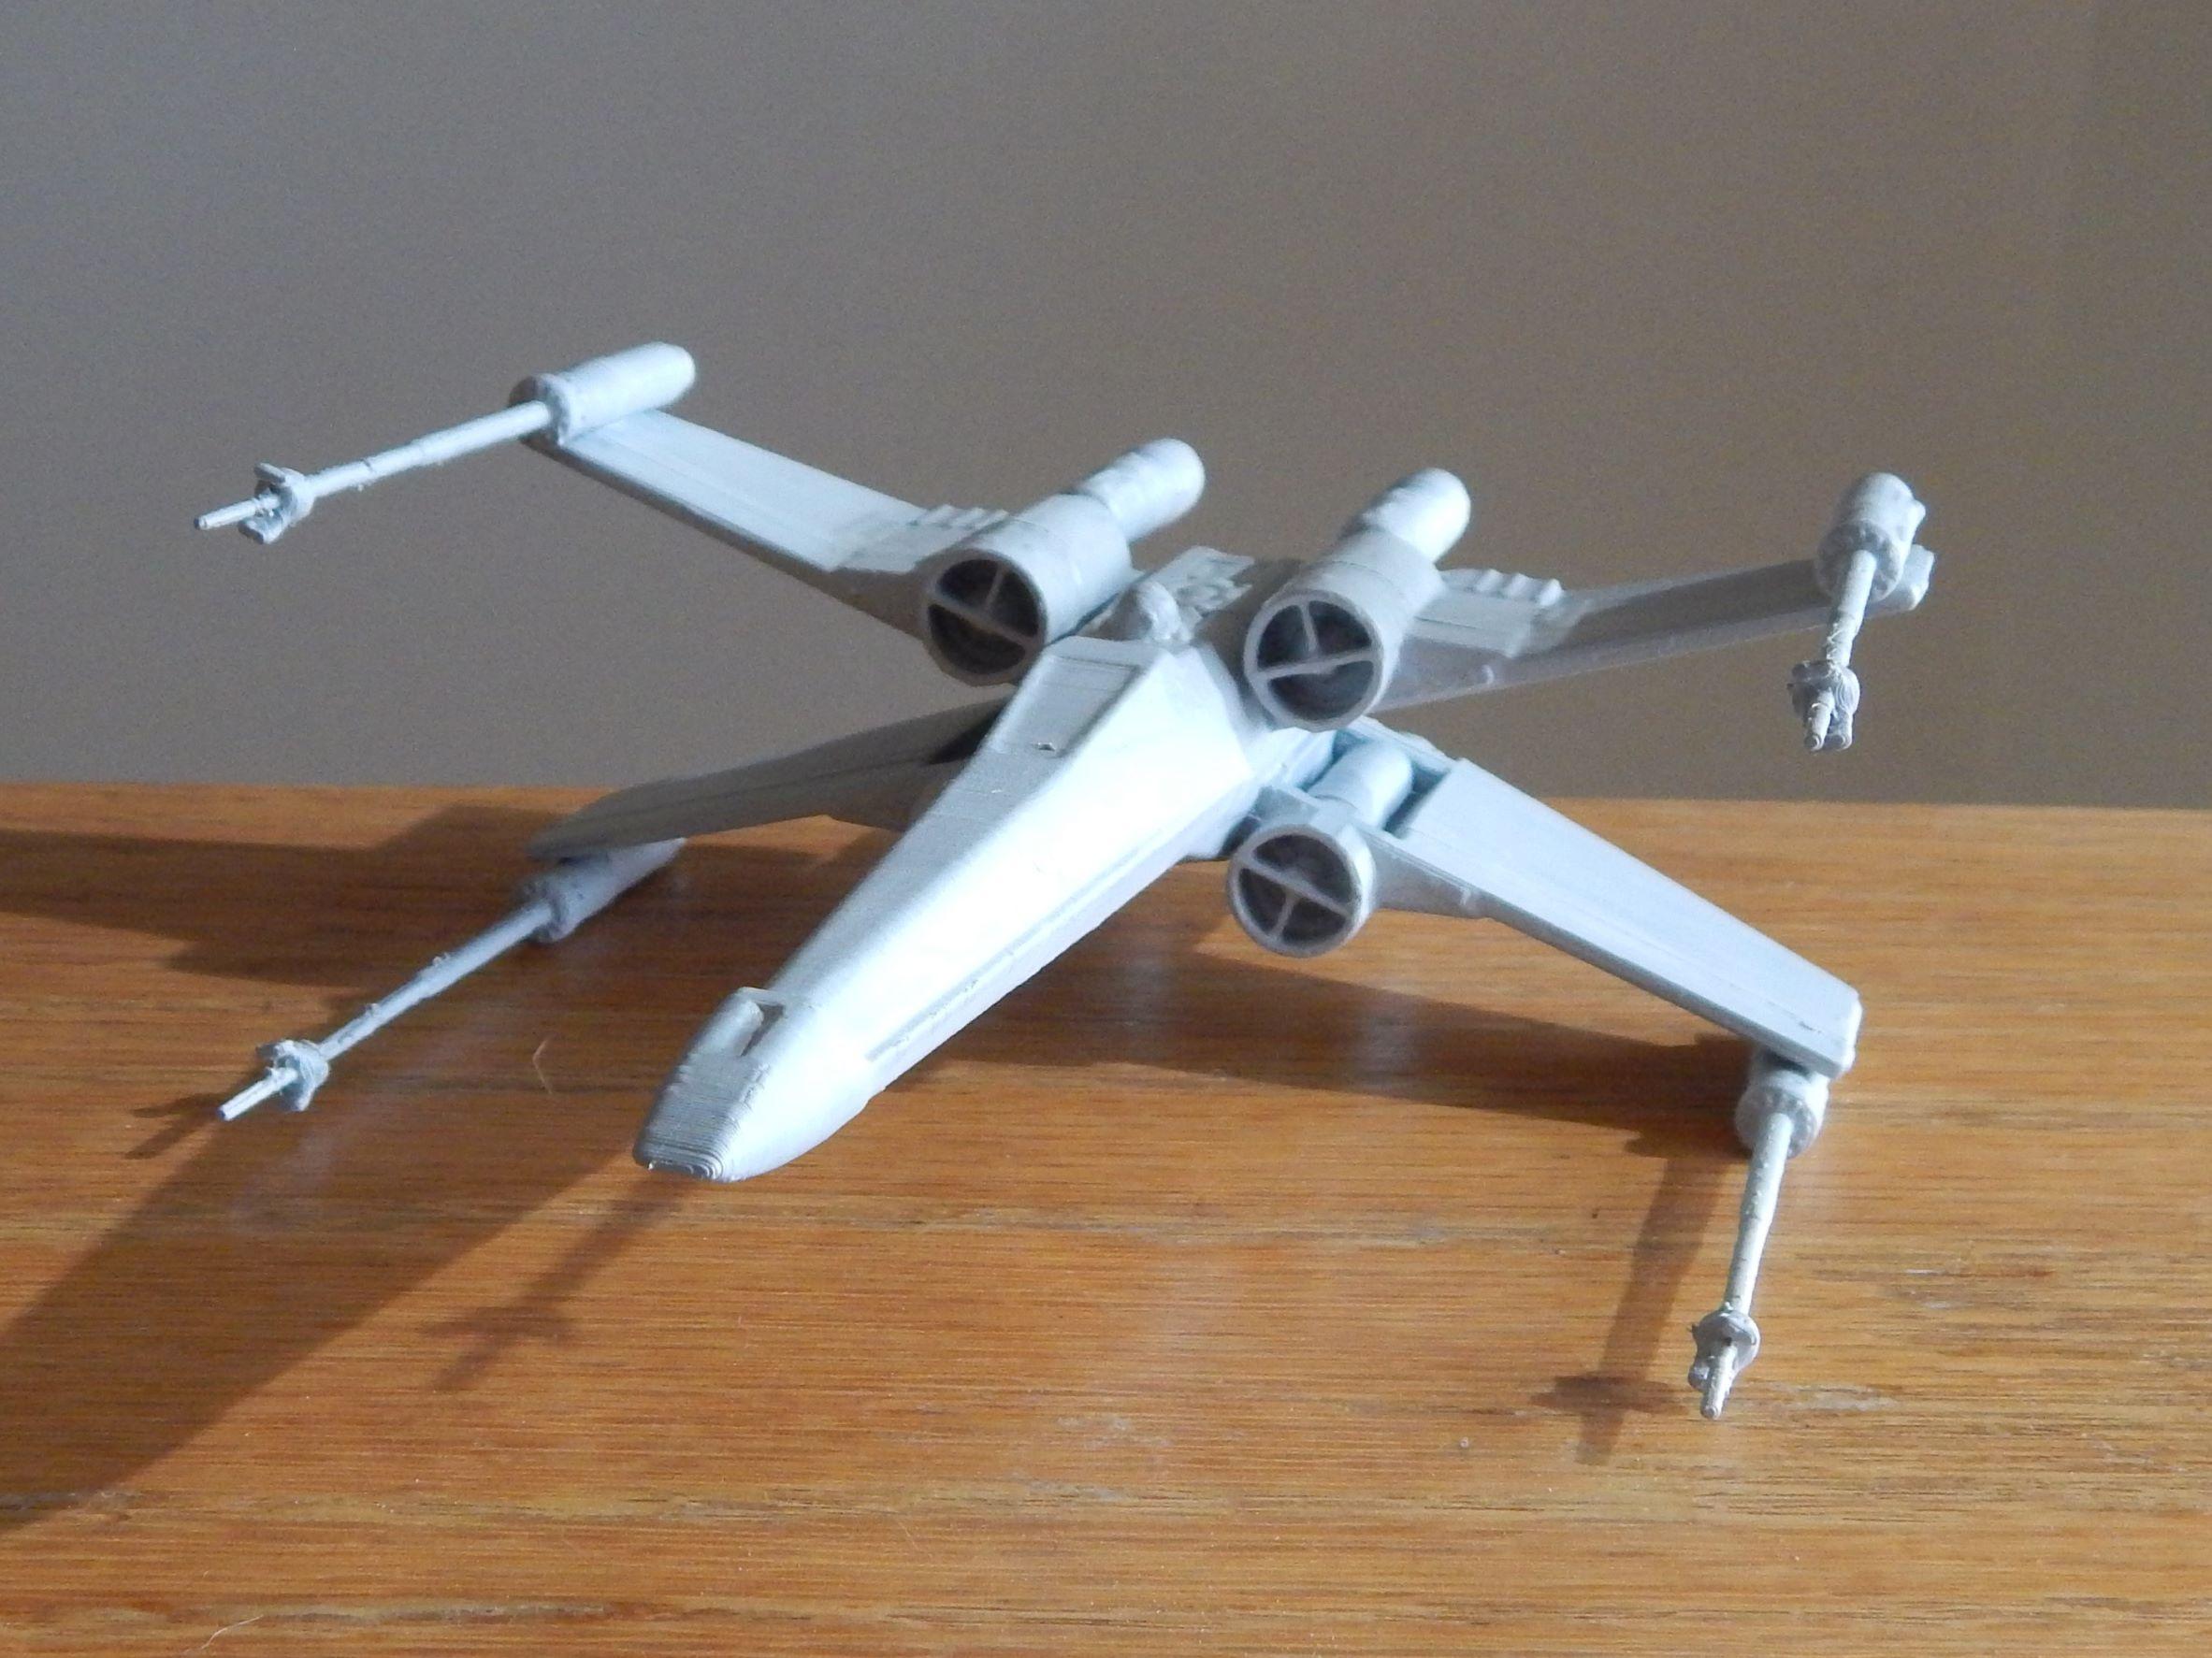 Star Wars X Wing, S-foils in attack position 3d model